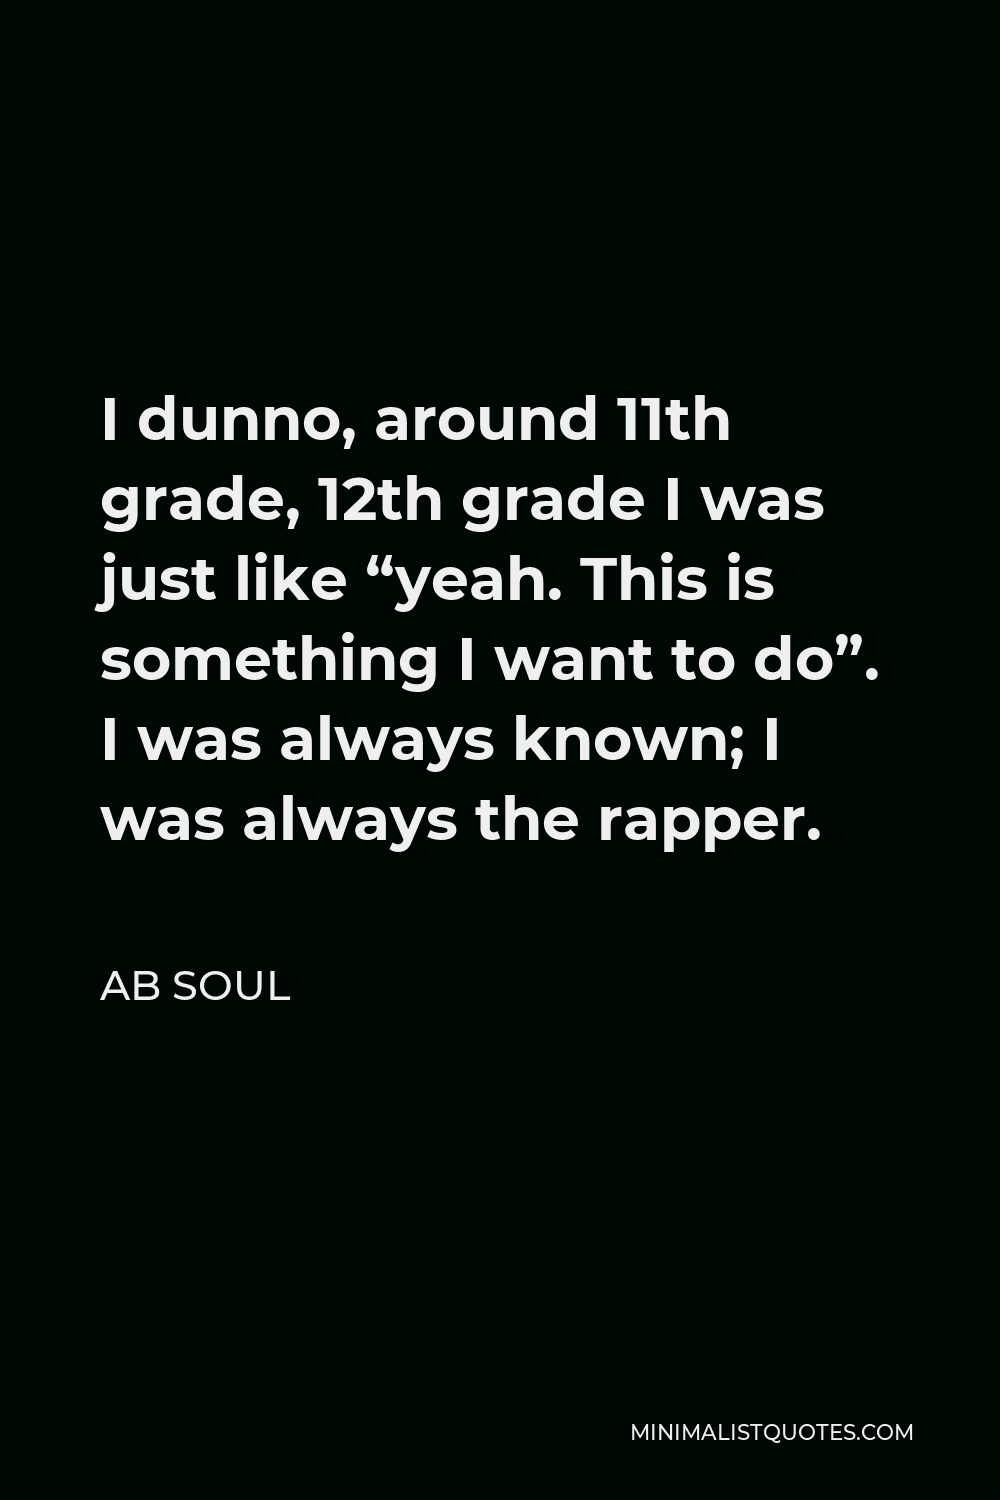 AB Soul Quote - I dunno, around 11th grade, 12th grade I was just like “yeah. This is something I want to do”. I was always known; I was always the rapper.